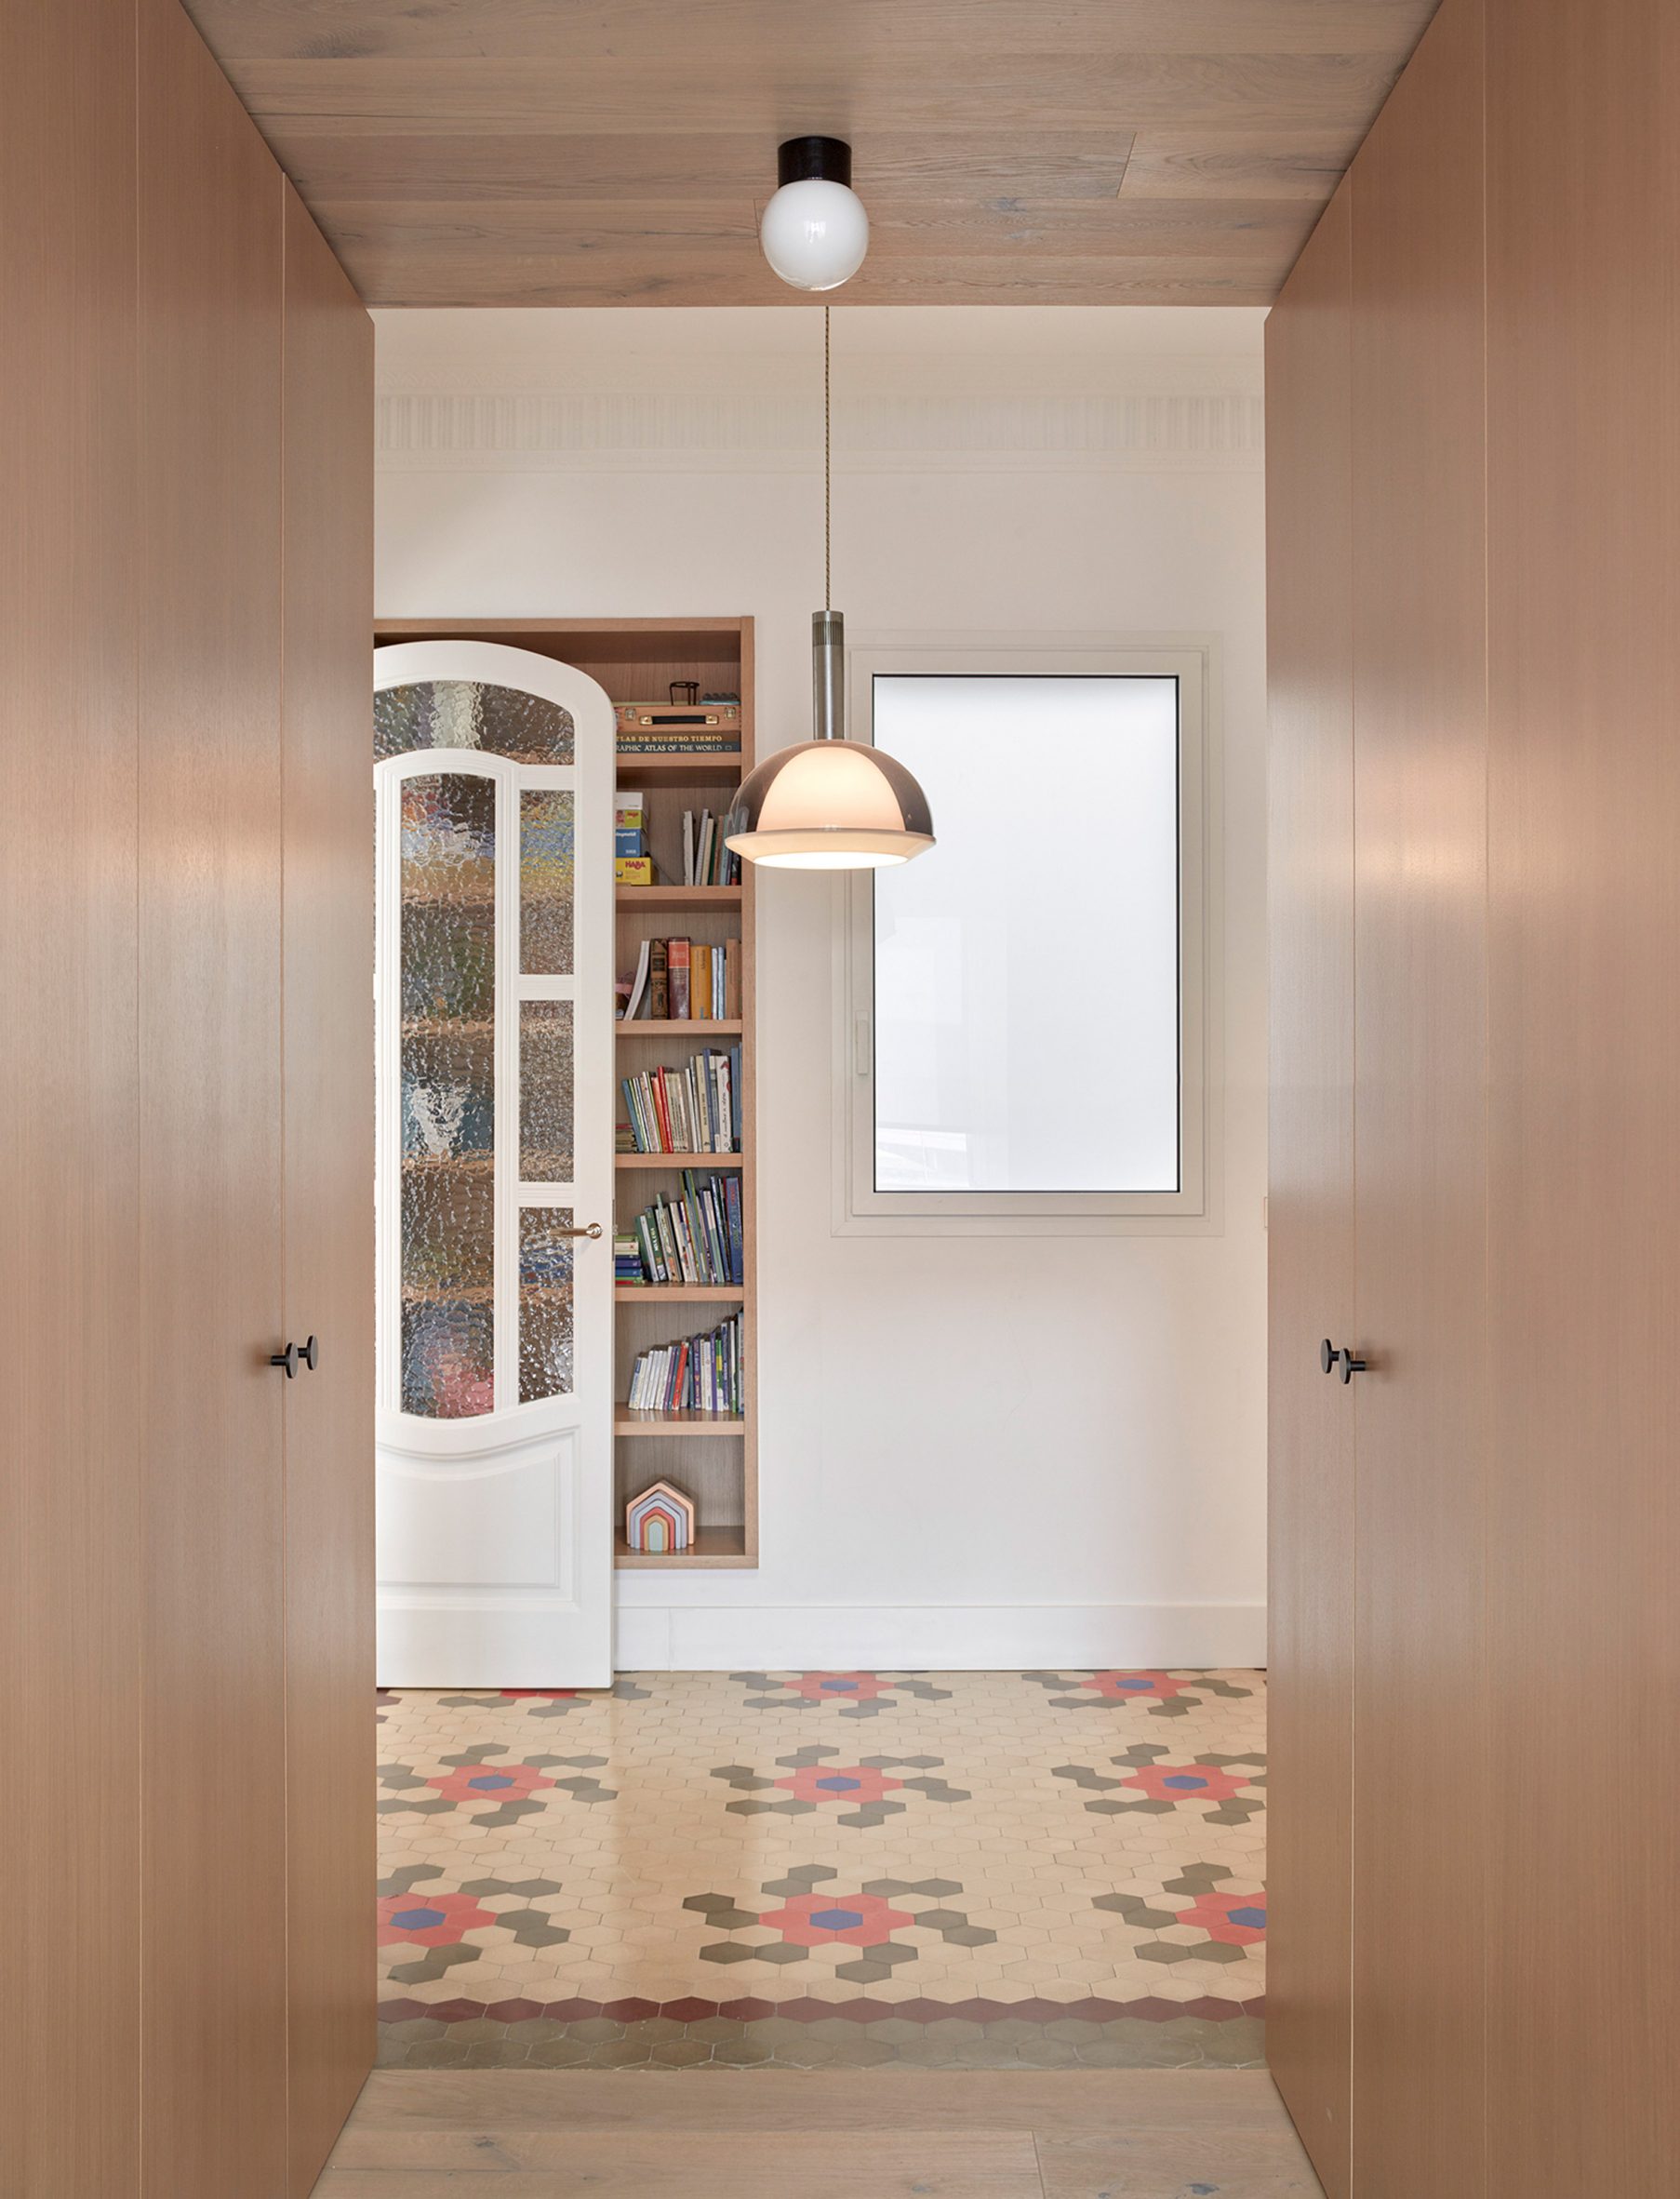 Wooden bookcase franked by wardrobes in interior by DG Arquitecto